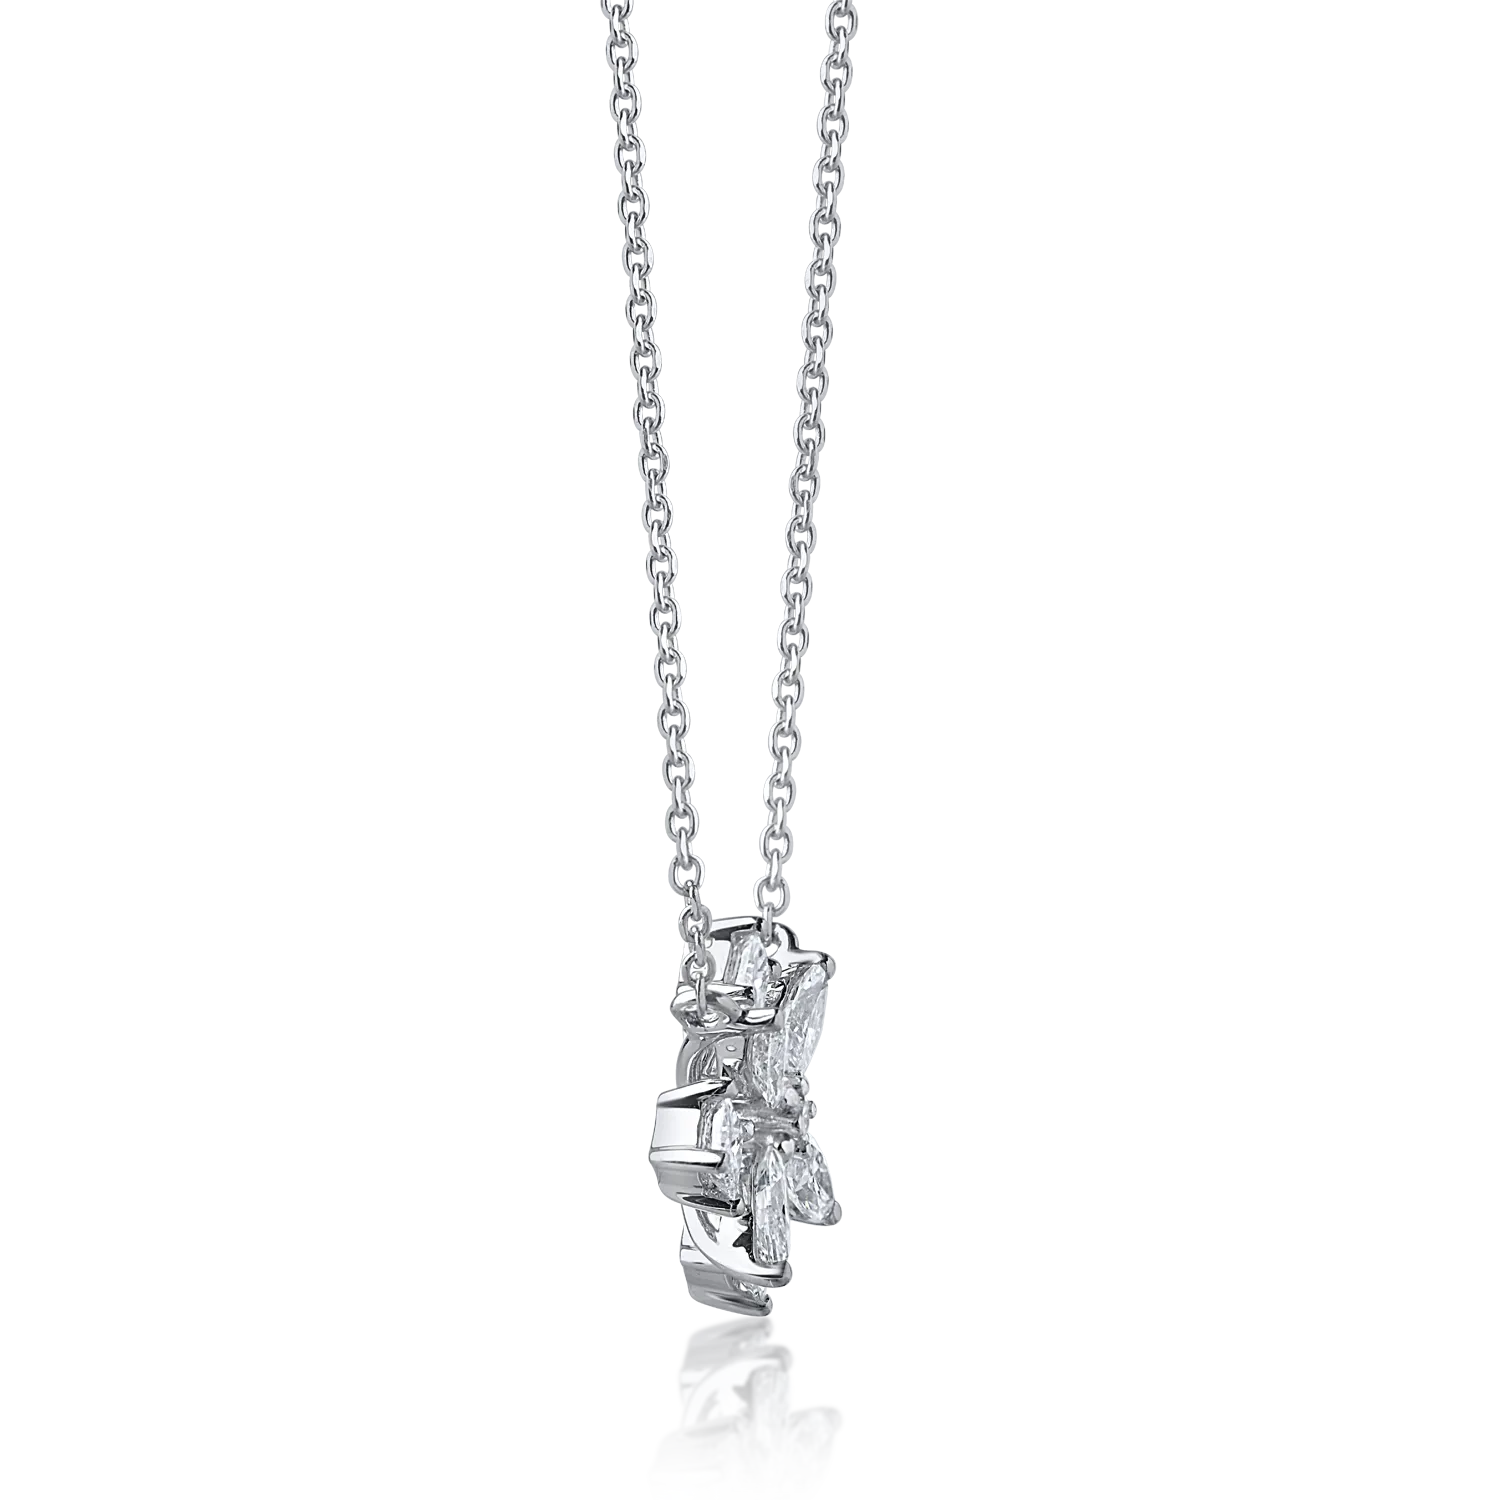 White gold pendant necklace with 0.5ct diamonds